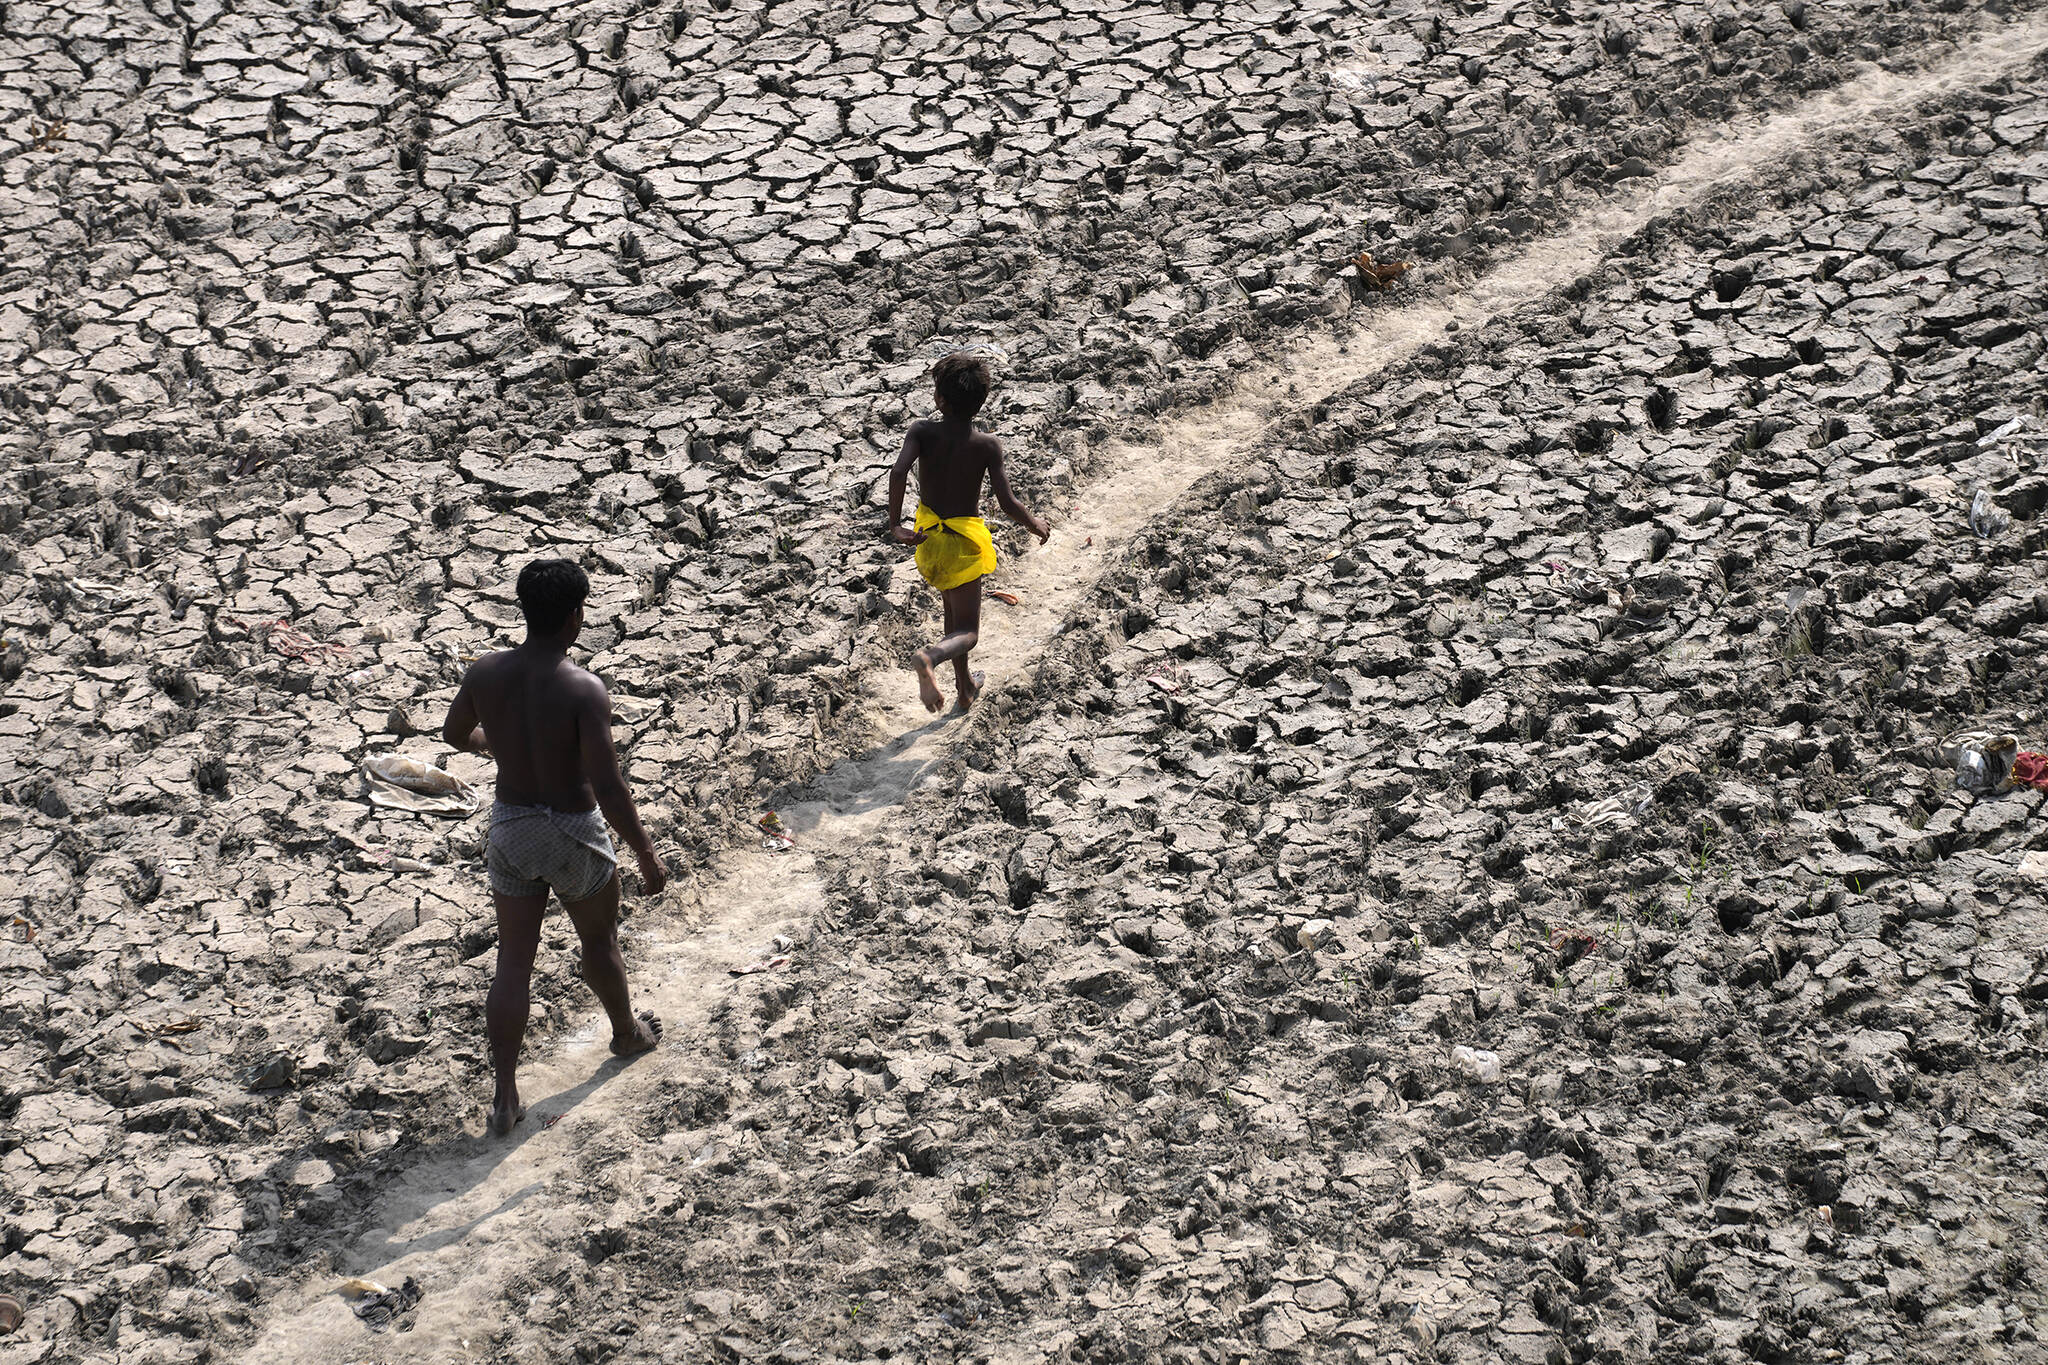 A man and a boy walk across the almost dried up bed of river Yamuna following hot weather in New Delhi, India, Monday, May 2, 2022. According to a report released by the World Meteorological Organization on Monday, May 9, 2022, the world is creeping closer to the warming threshold international agreements are trying to prevent, with nearly a 50-50 chance that Earth will temporarily hit that temperature mark within the next five years. (AP Photo / Manish Swarup)